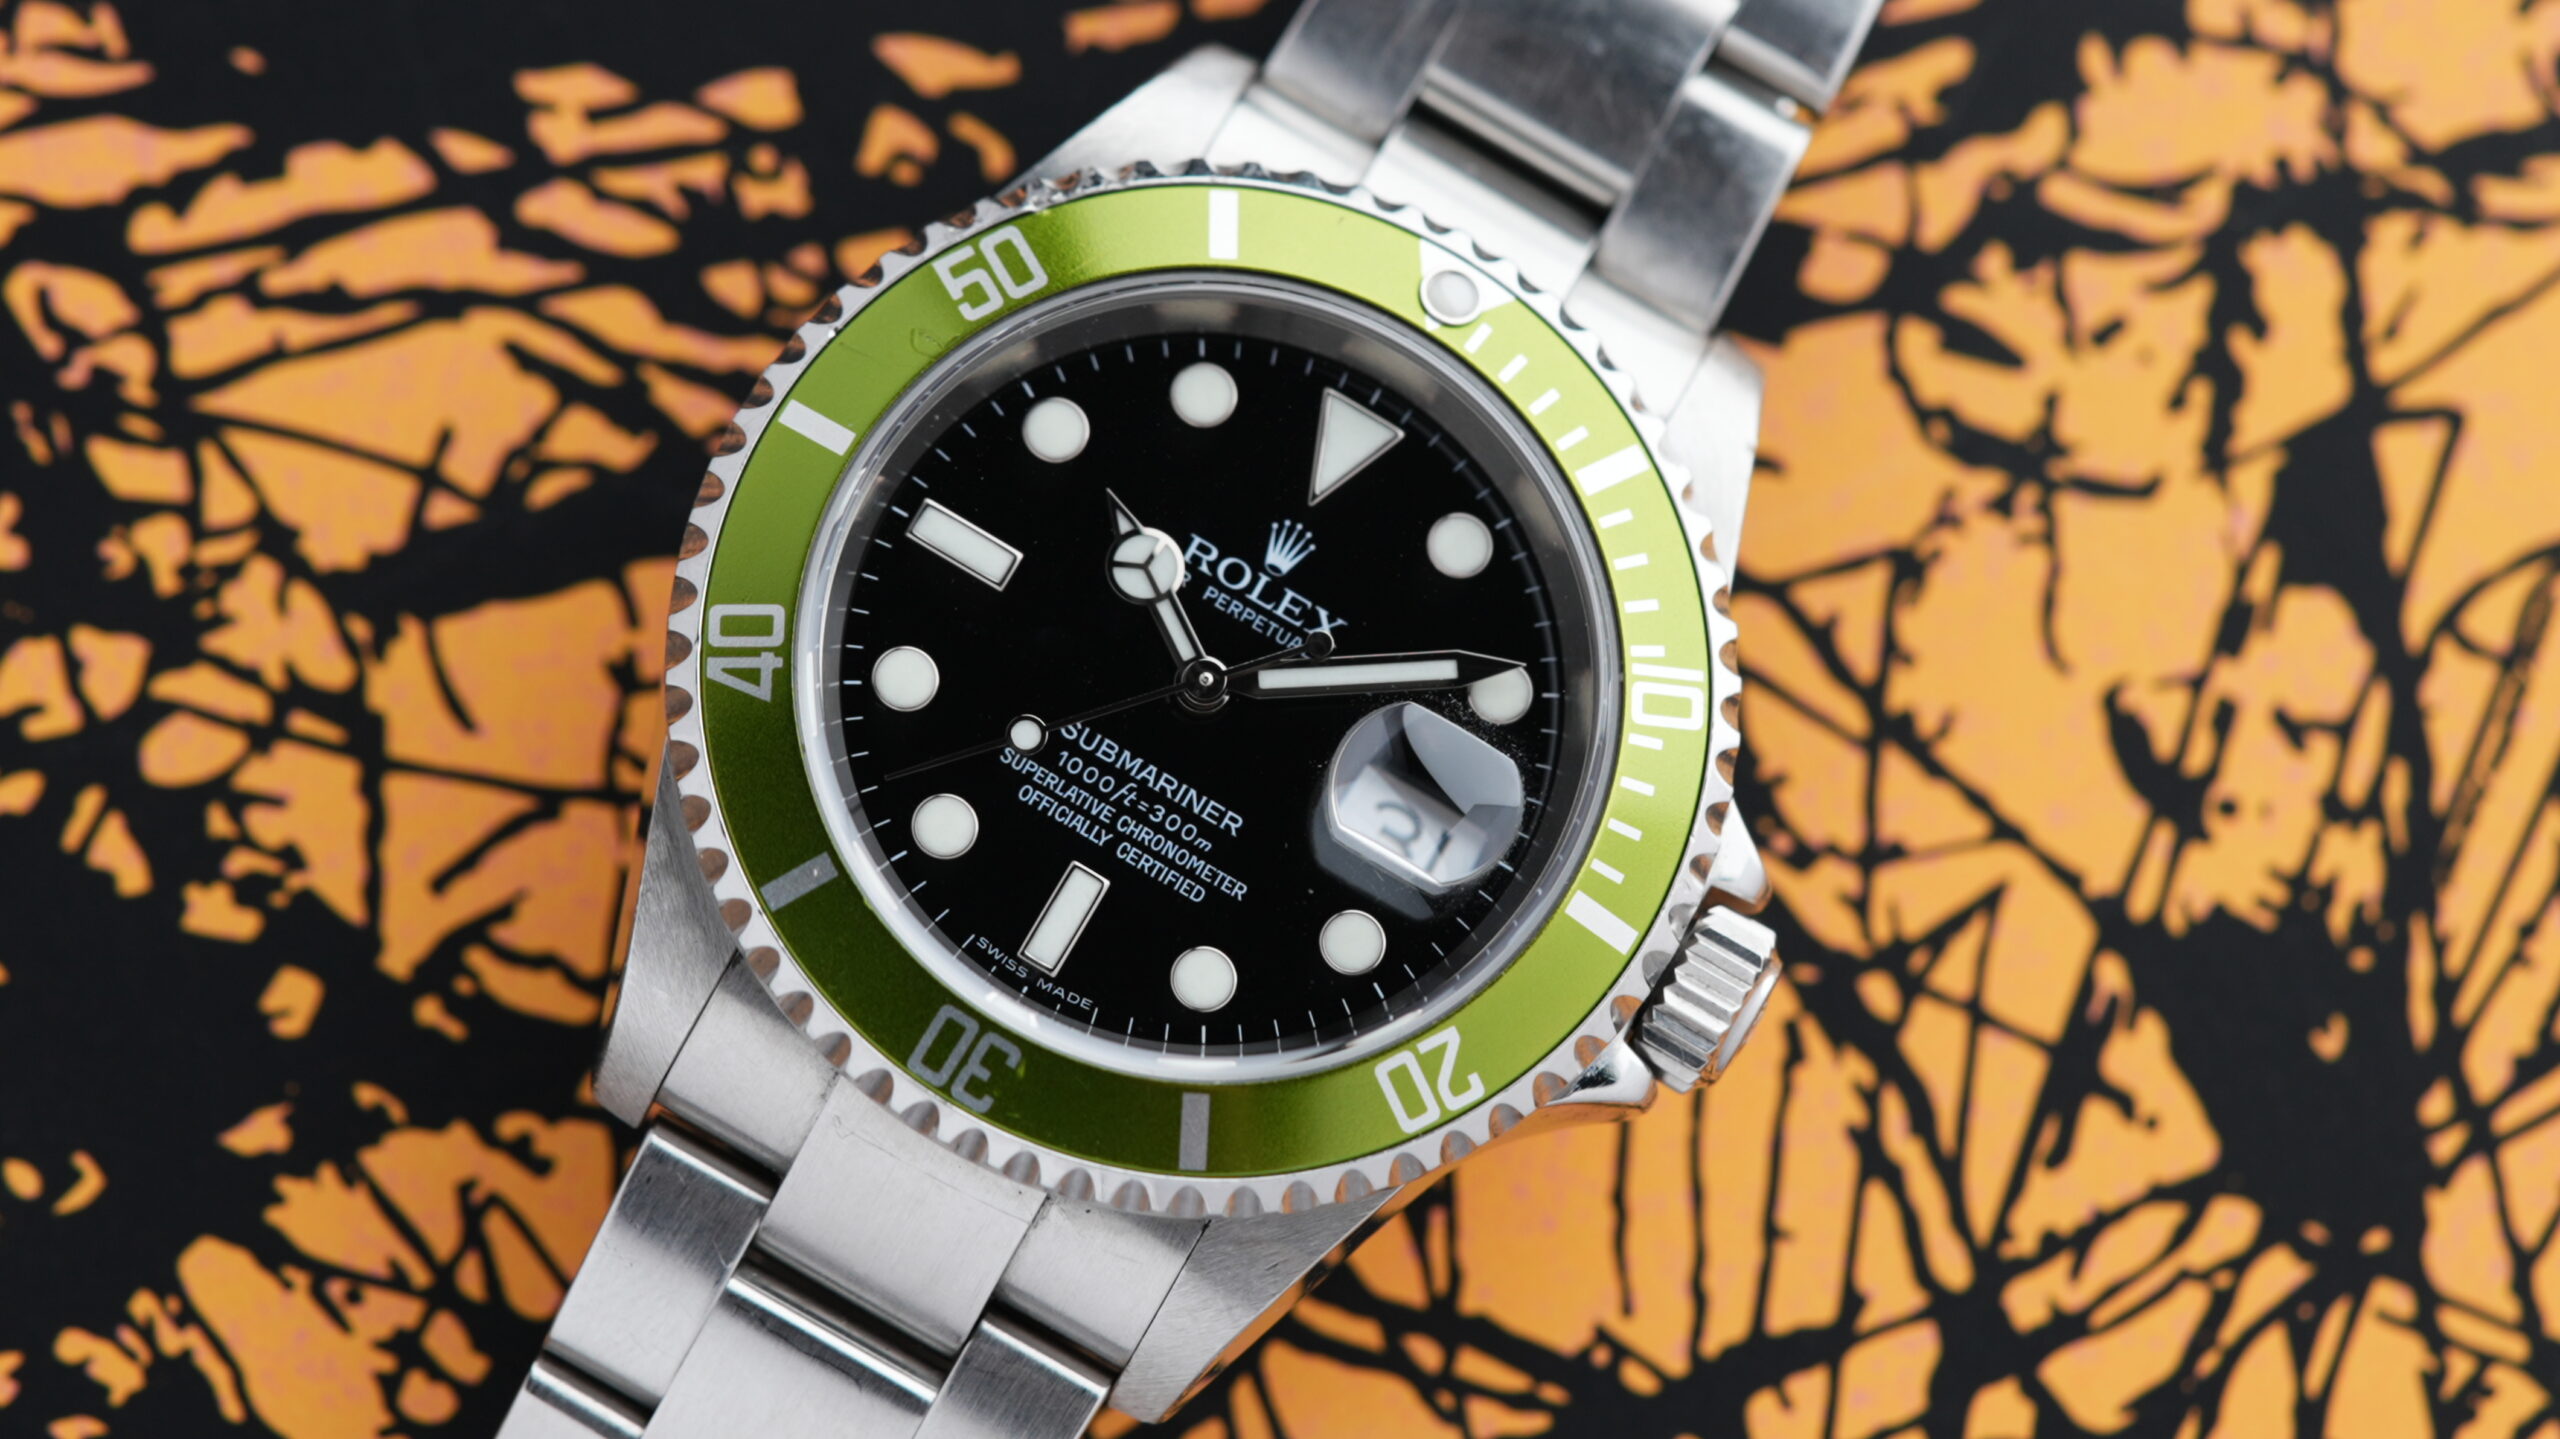 Rolex 【Polished】Submariner Kermit 16610LV Green Date for $12,063 for  sale from a Trusted Seller on Chrono24